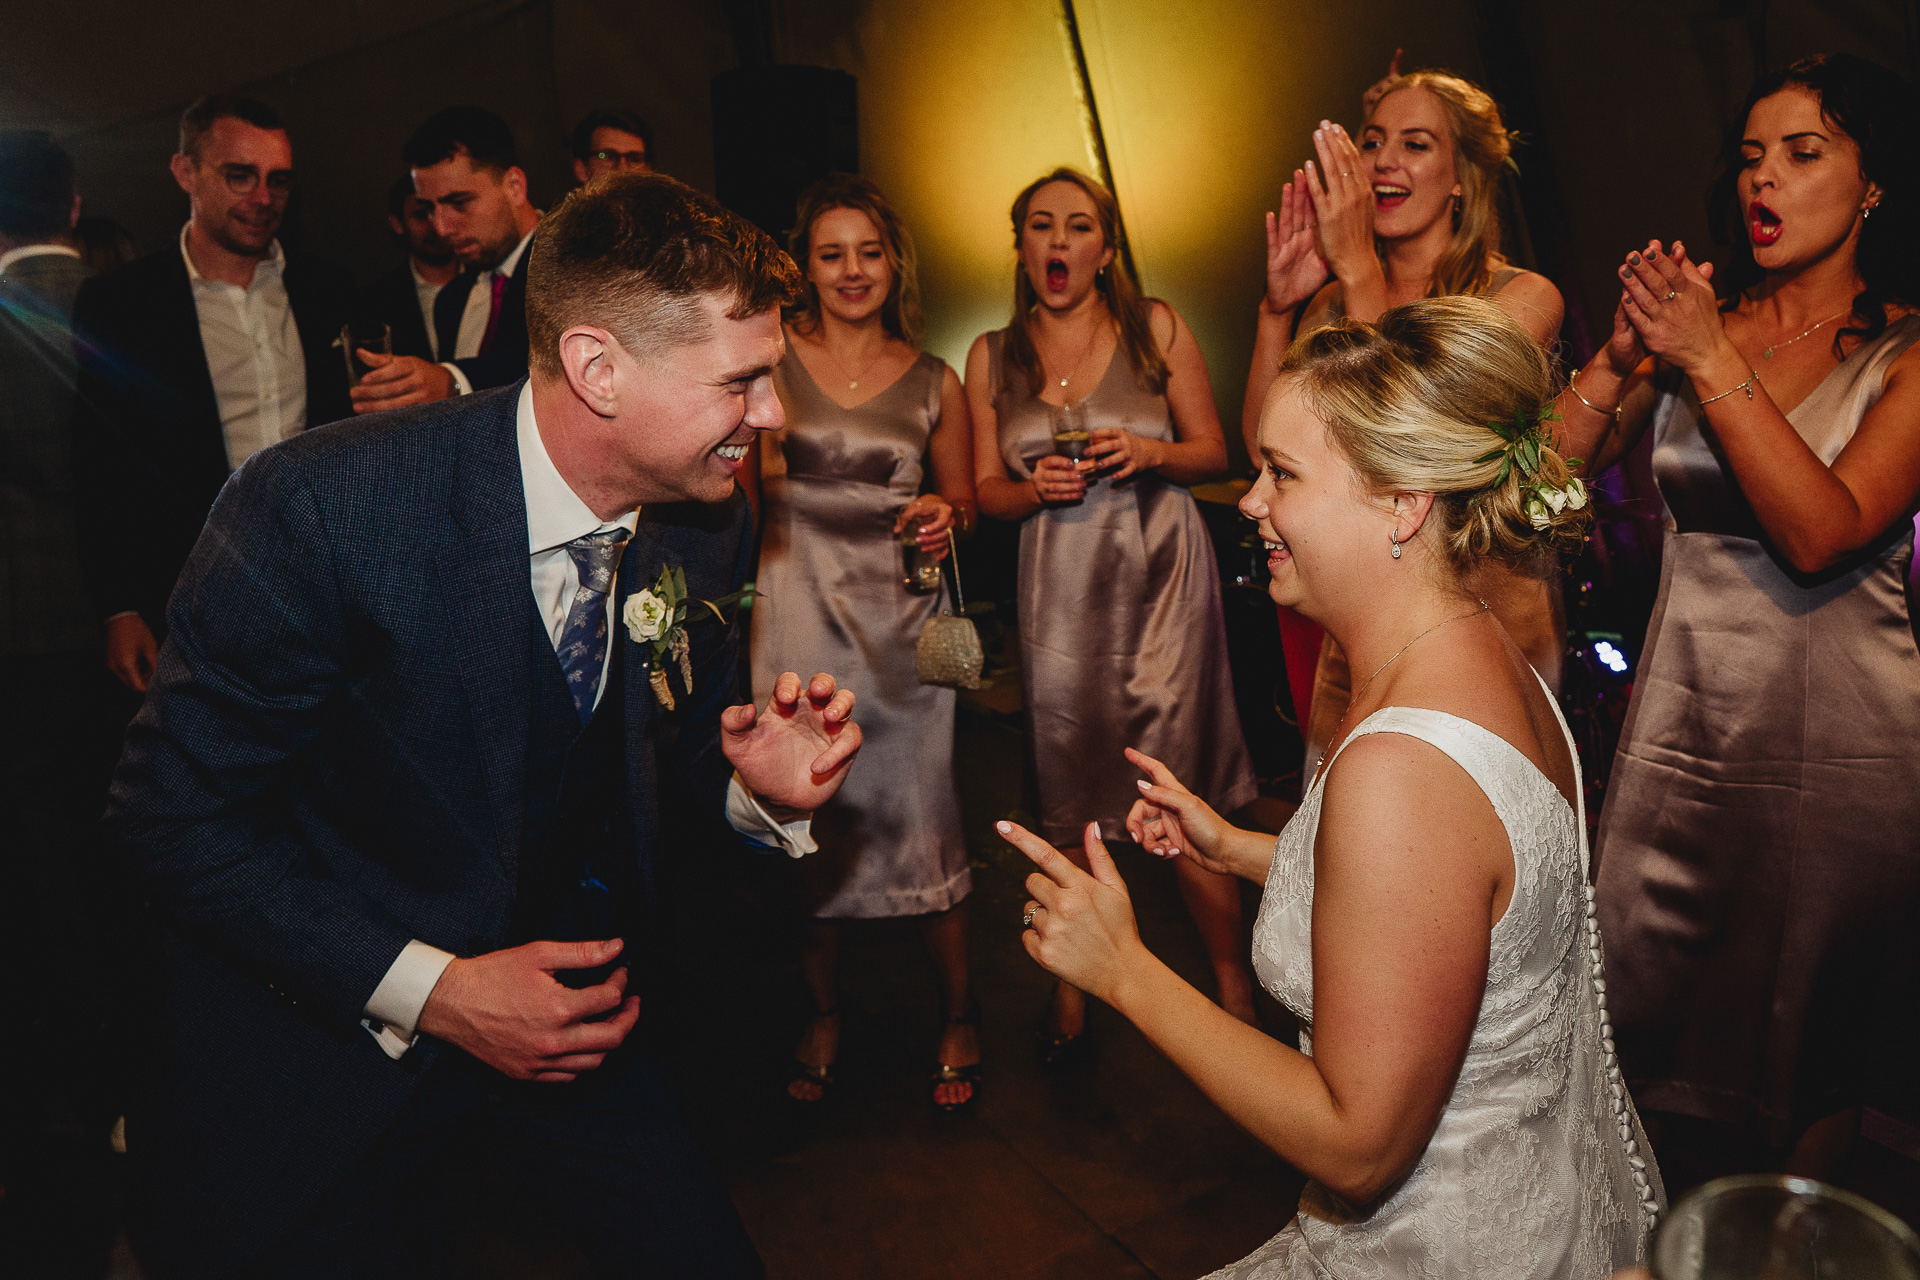 Bride and groom dancing together surrounded by clapping bridesmaids